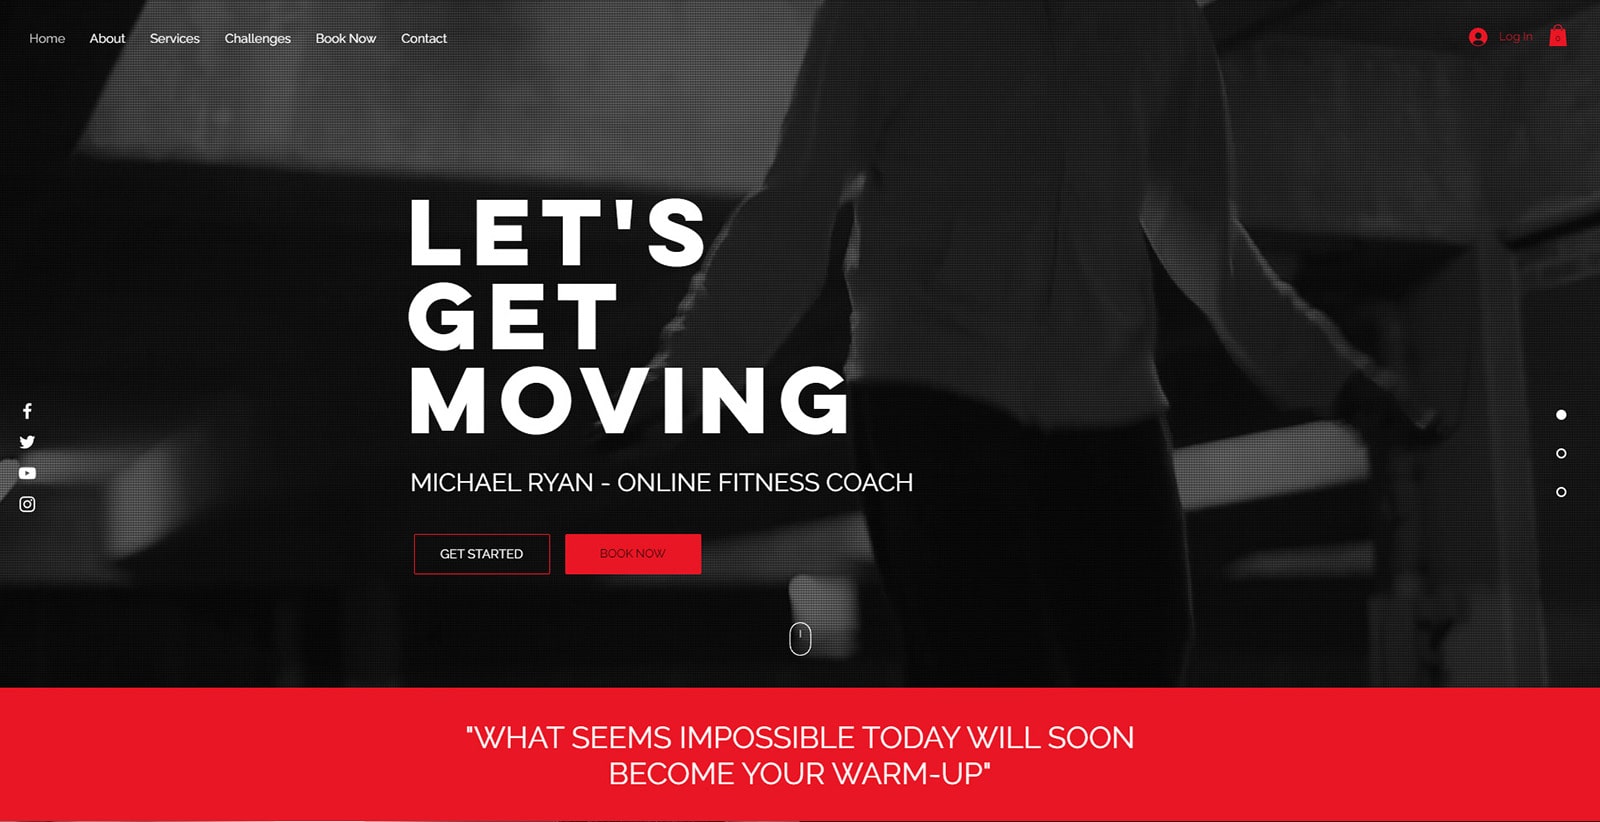 Illustration of Michael Ryan, a website design for gyms and fitness centers optimized for Wix.